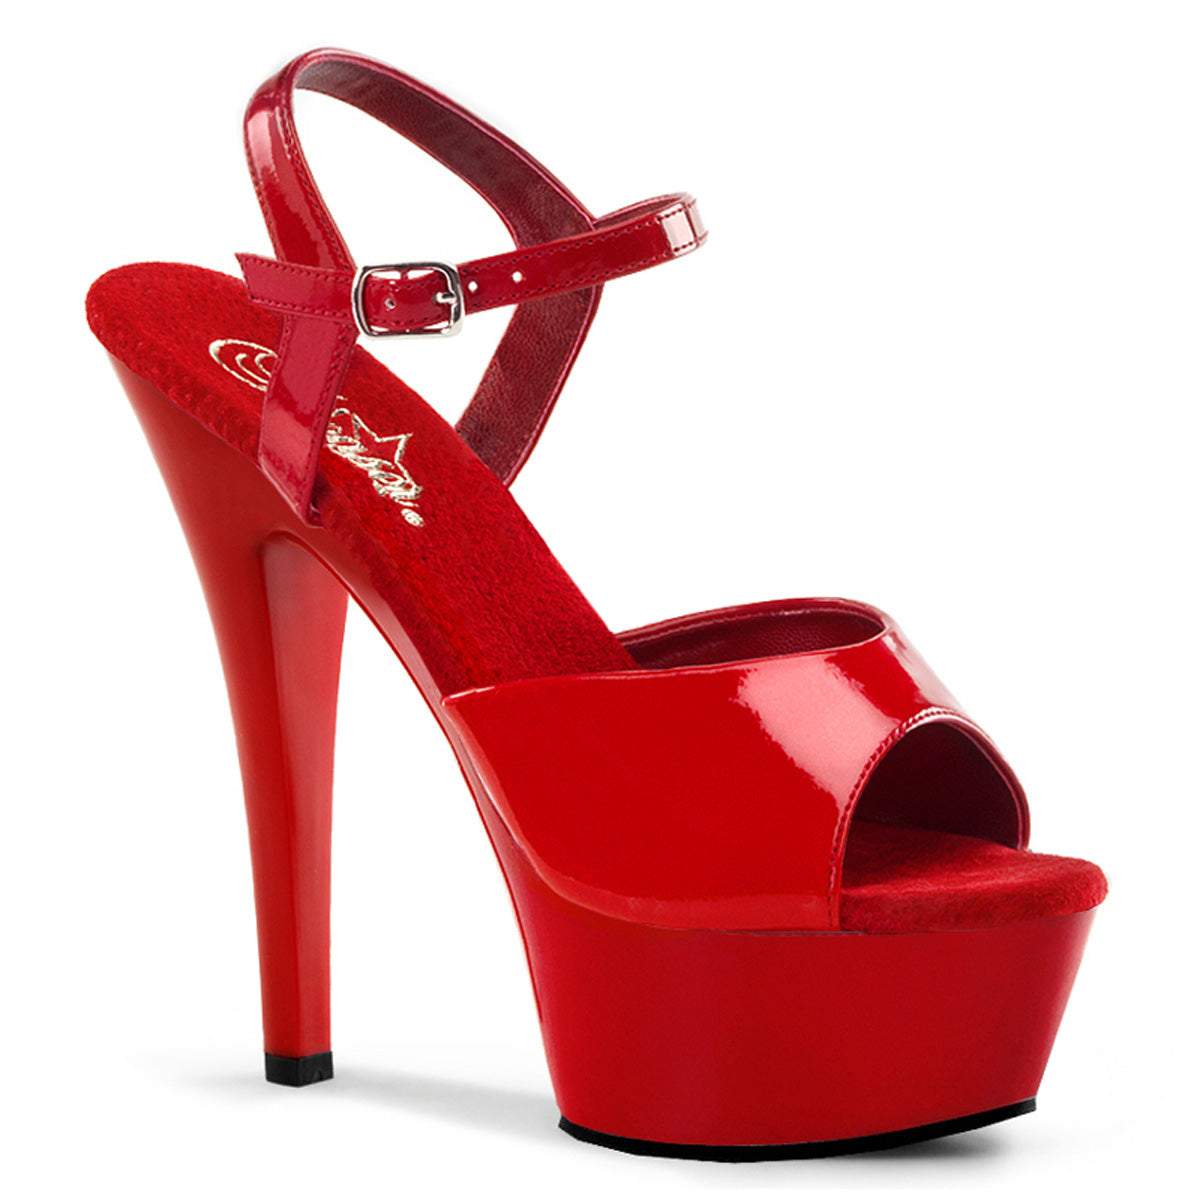 KISS-209 Red Patent/Red